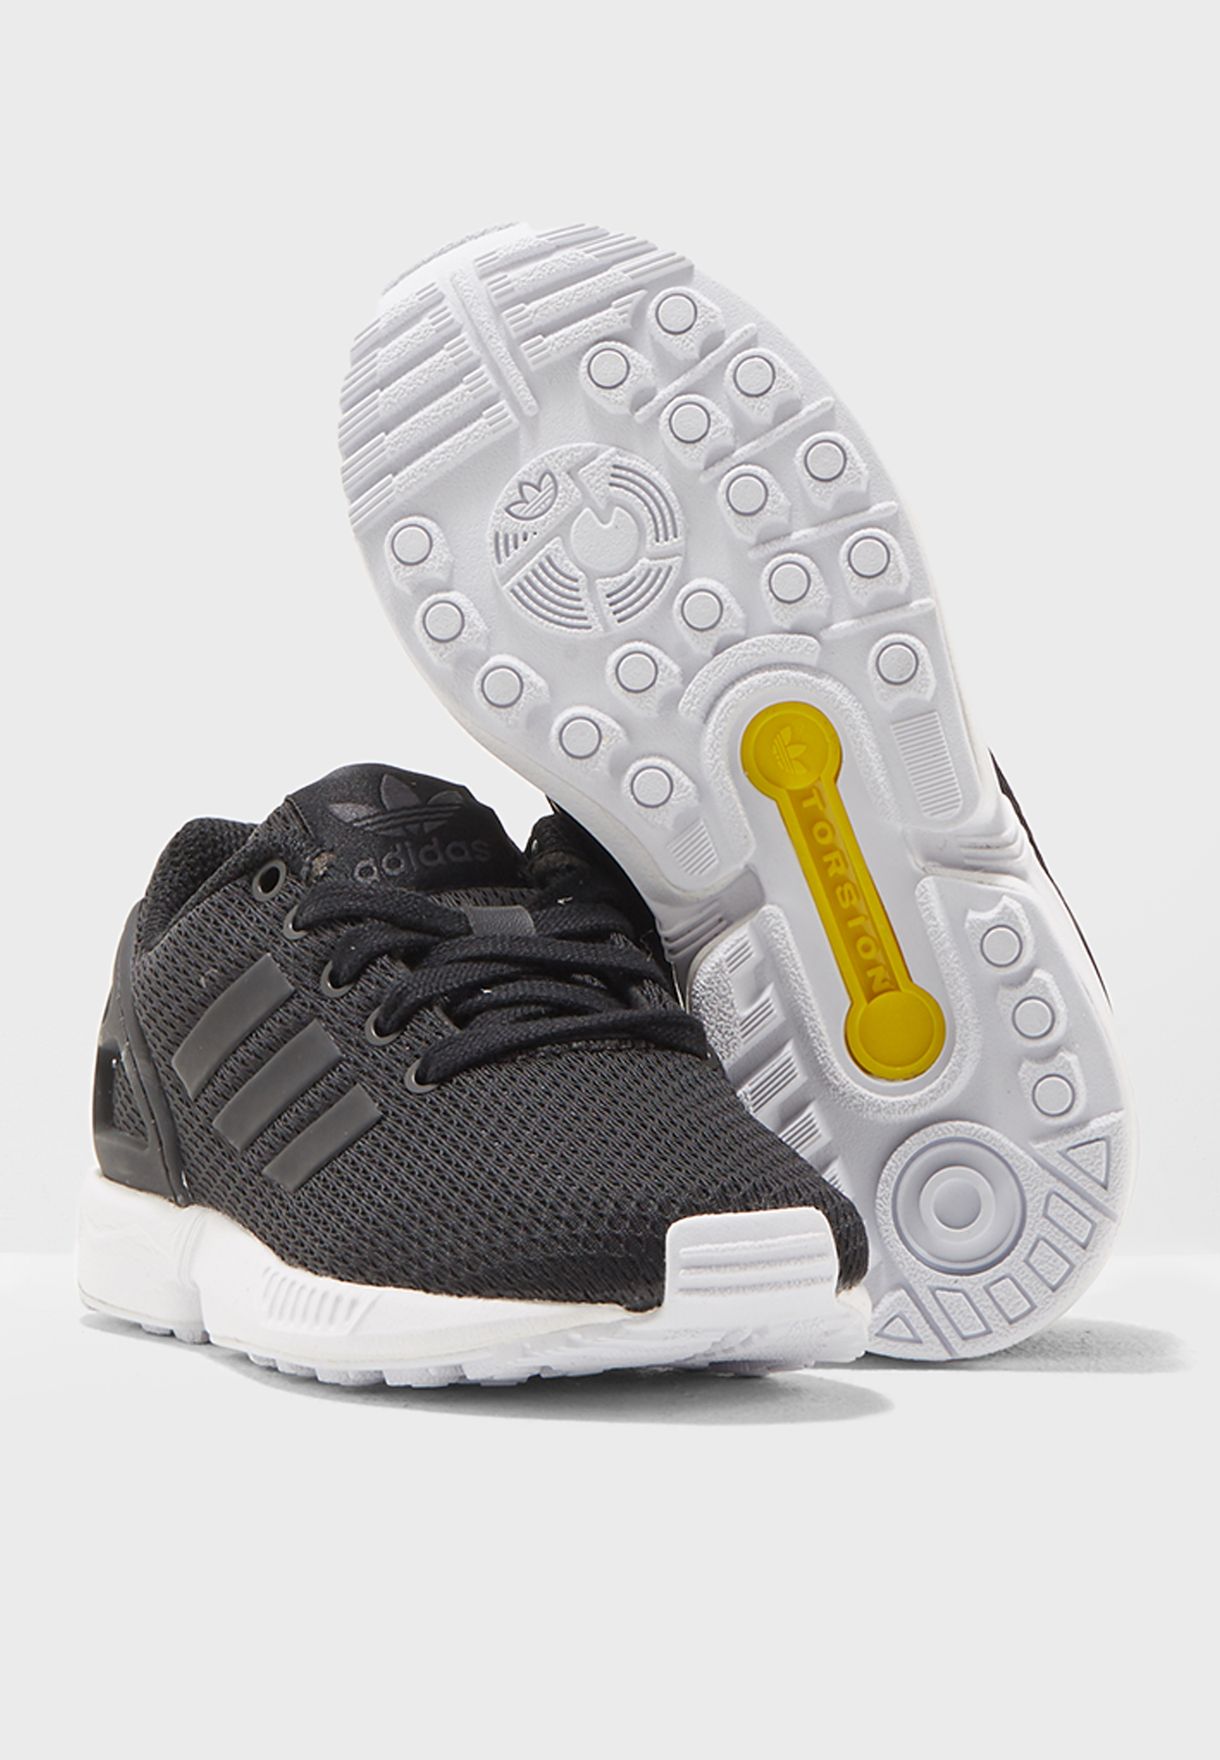 ZX Flux Casual Kids Sneakers Shoes